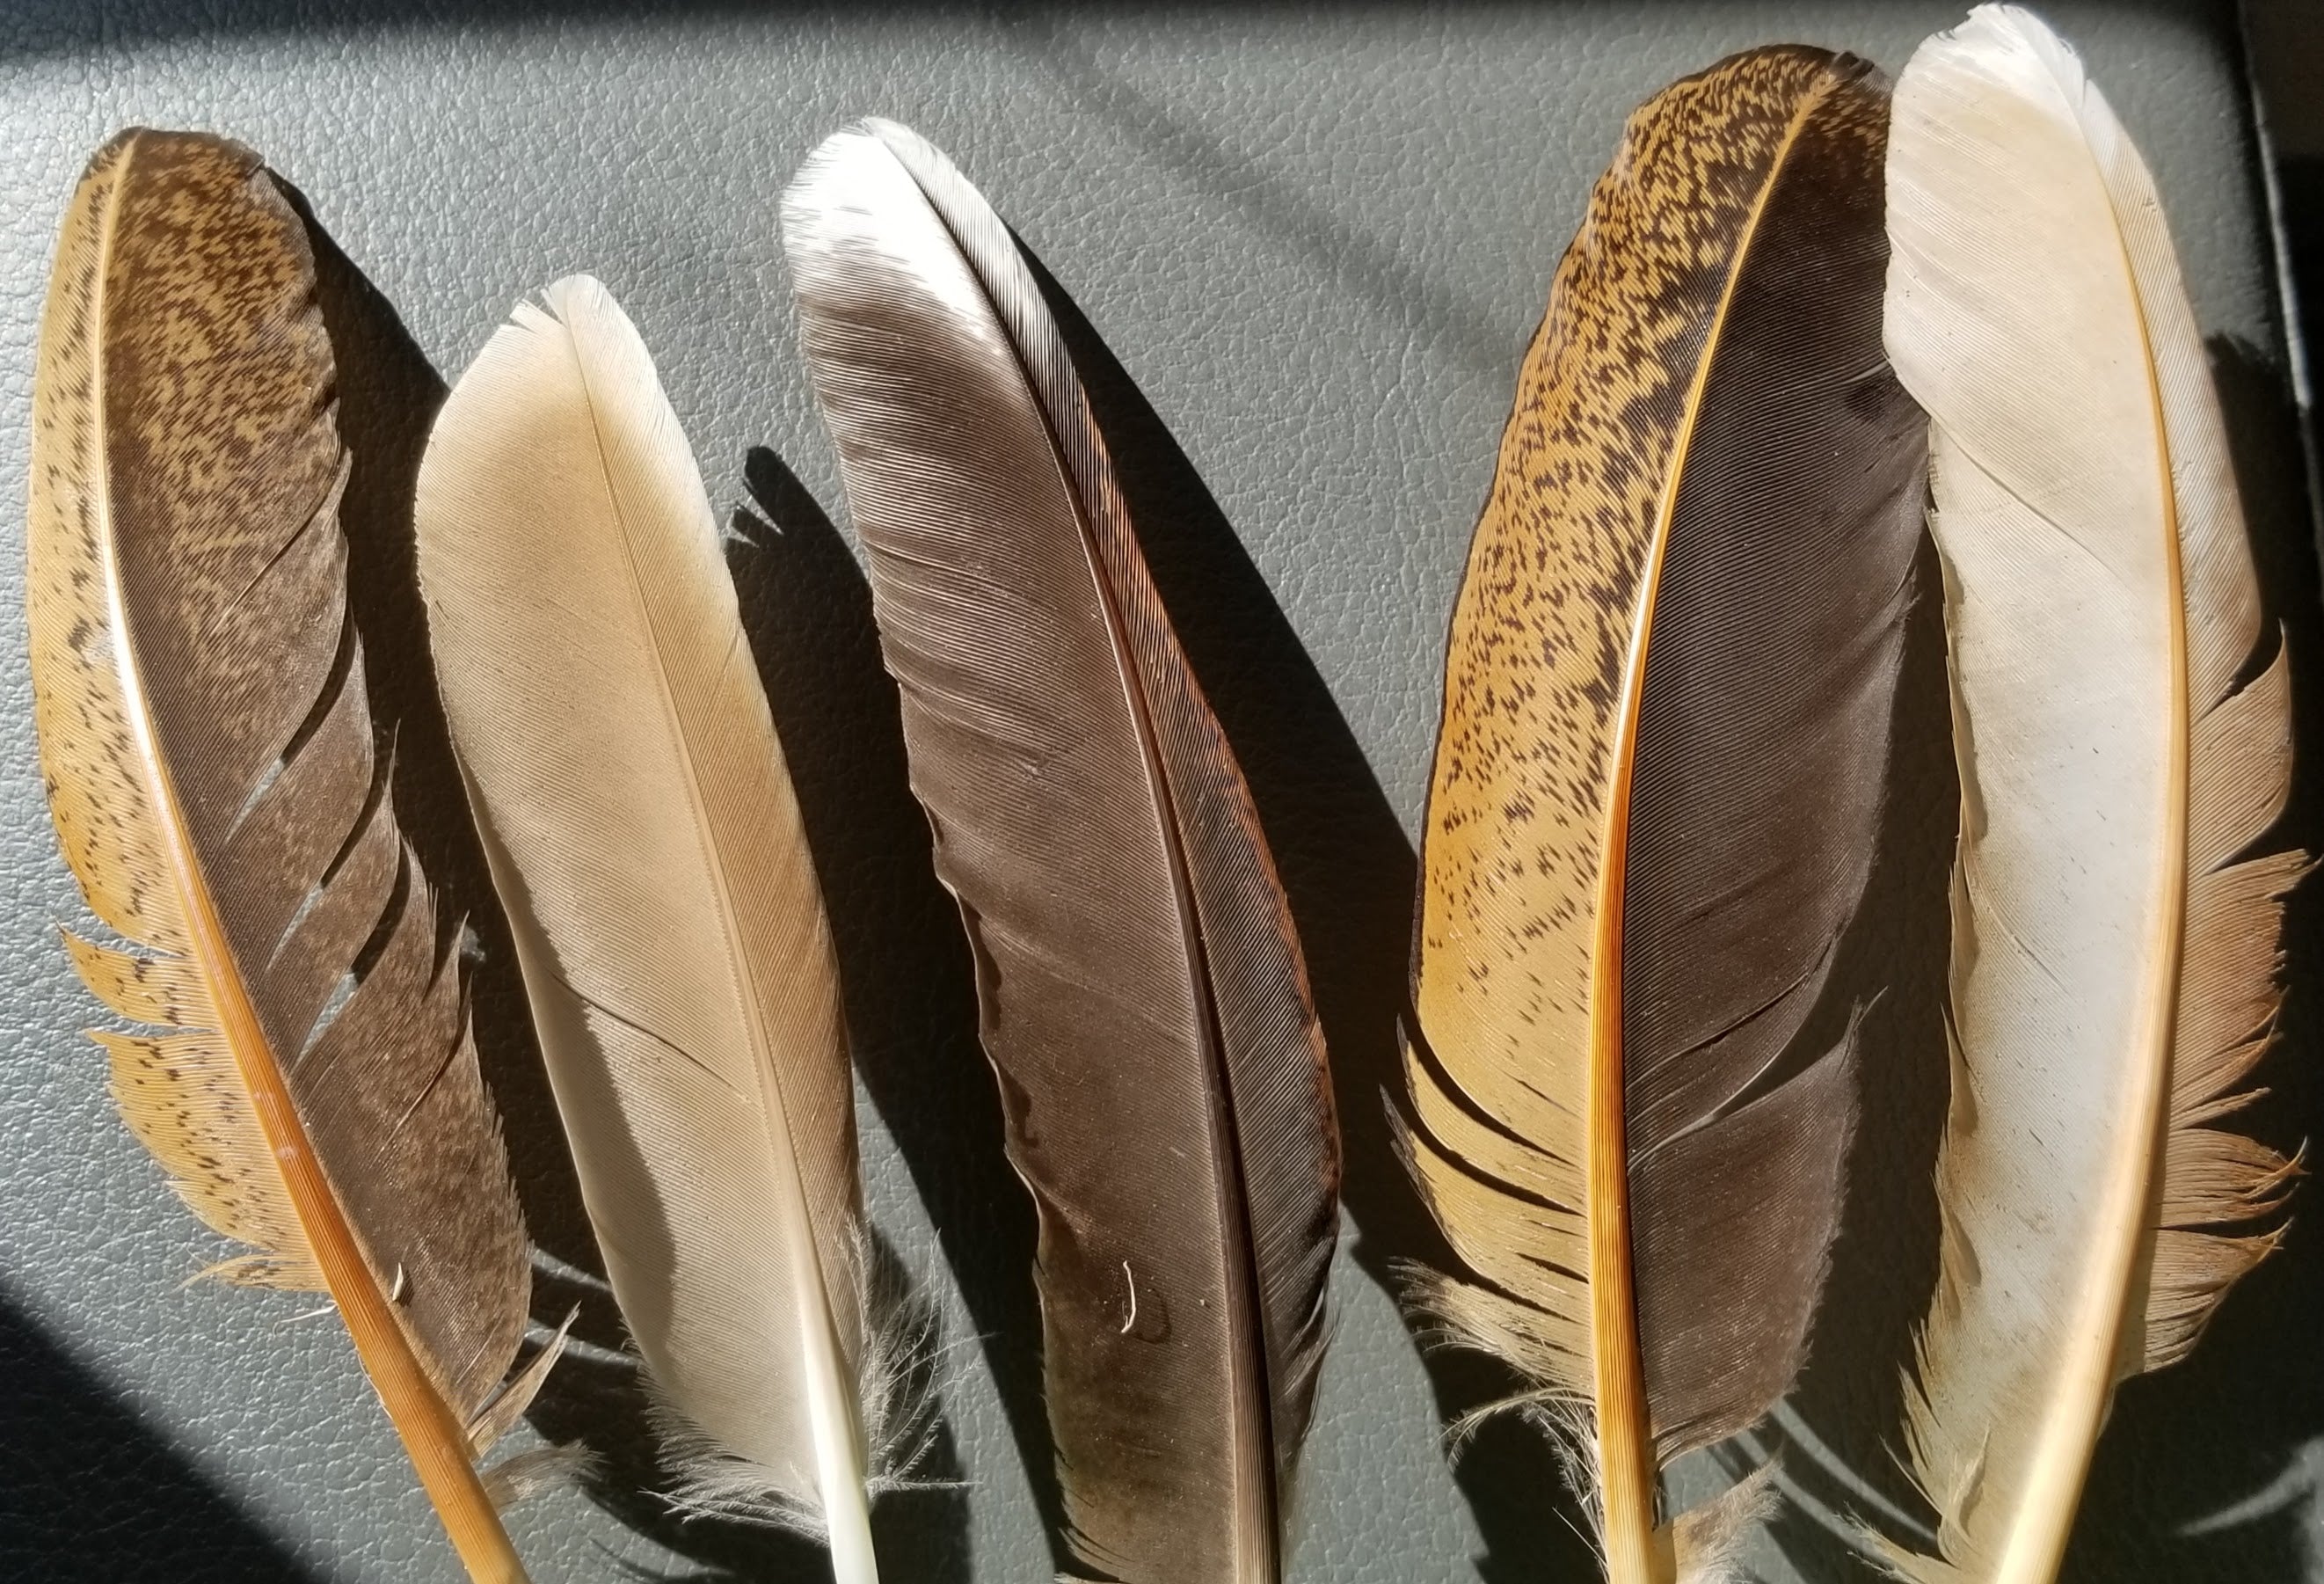 Water repellent feathers: NOT due to the oil gland